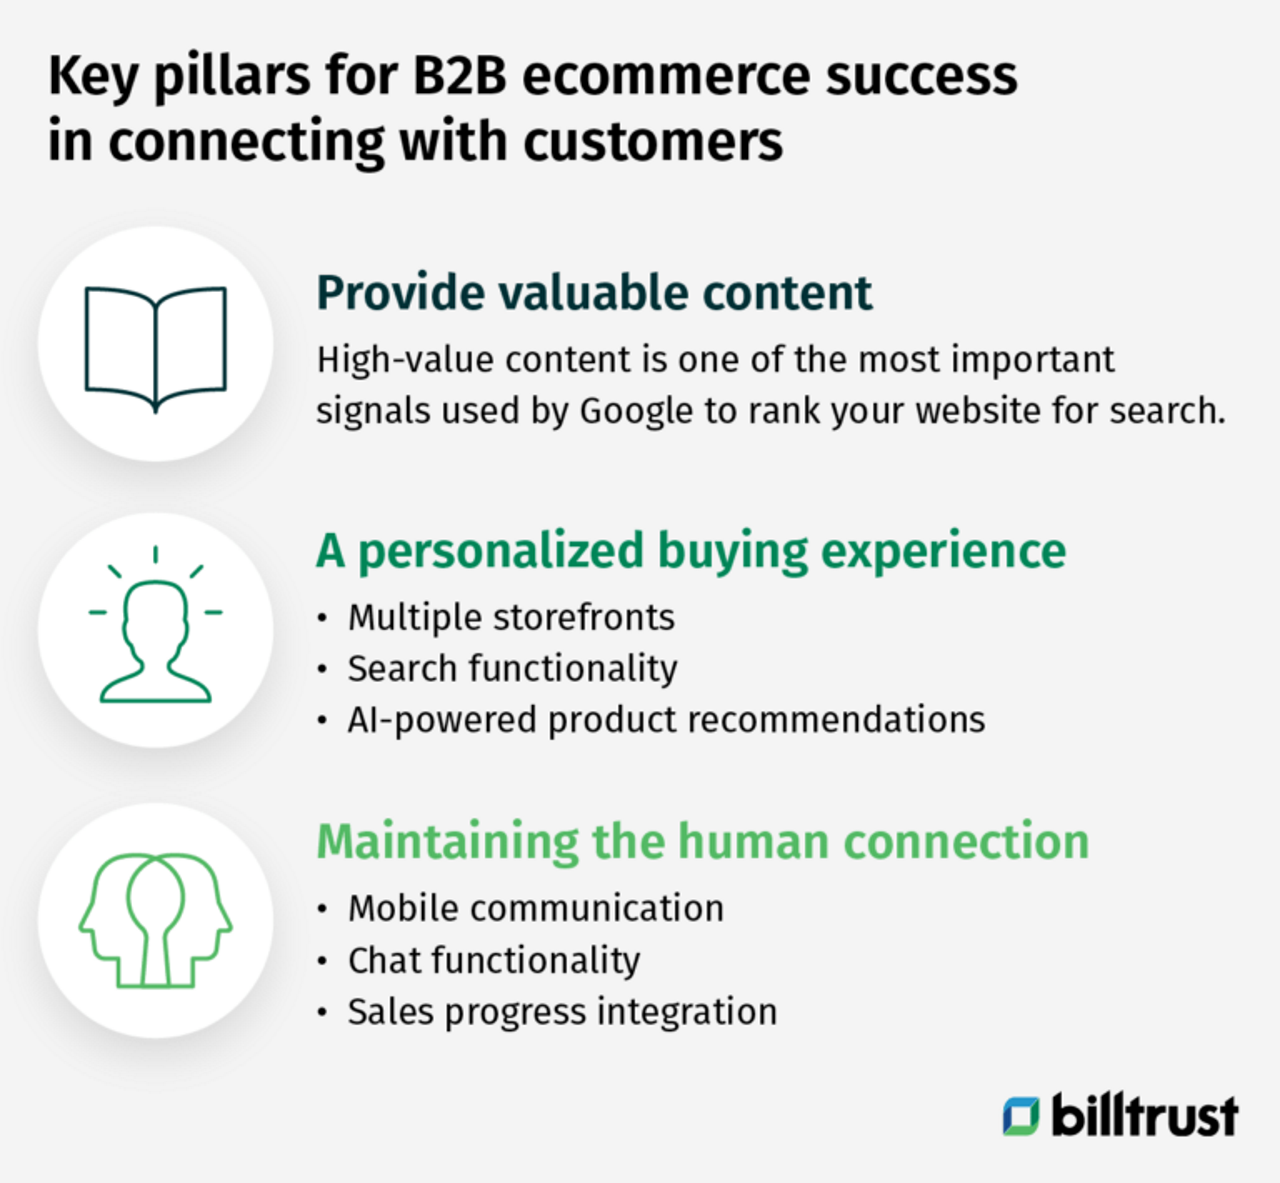 Key pillars for B2B ecommerce success in connecting with customers graphic